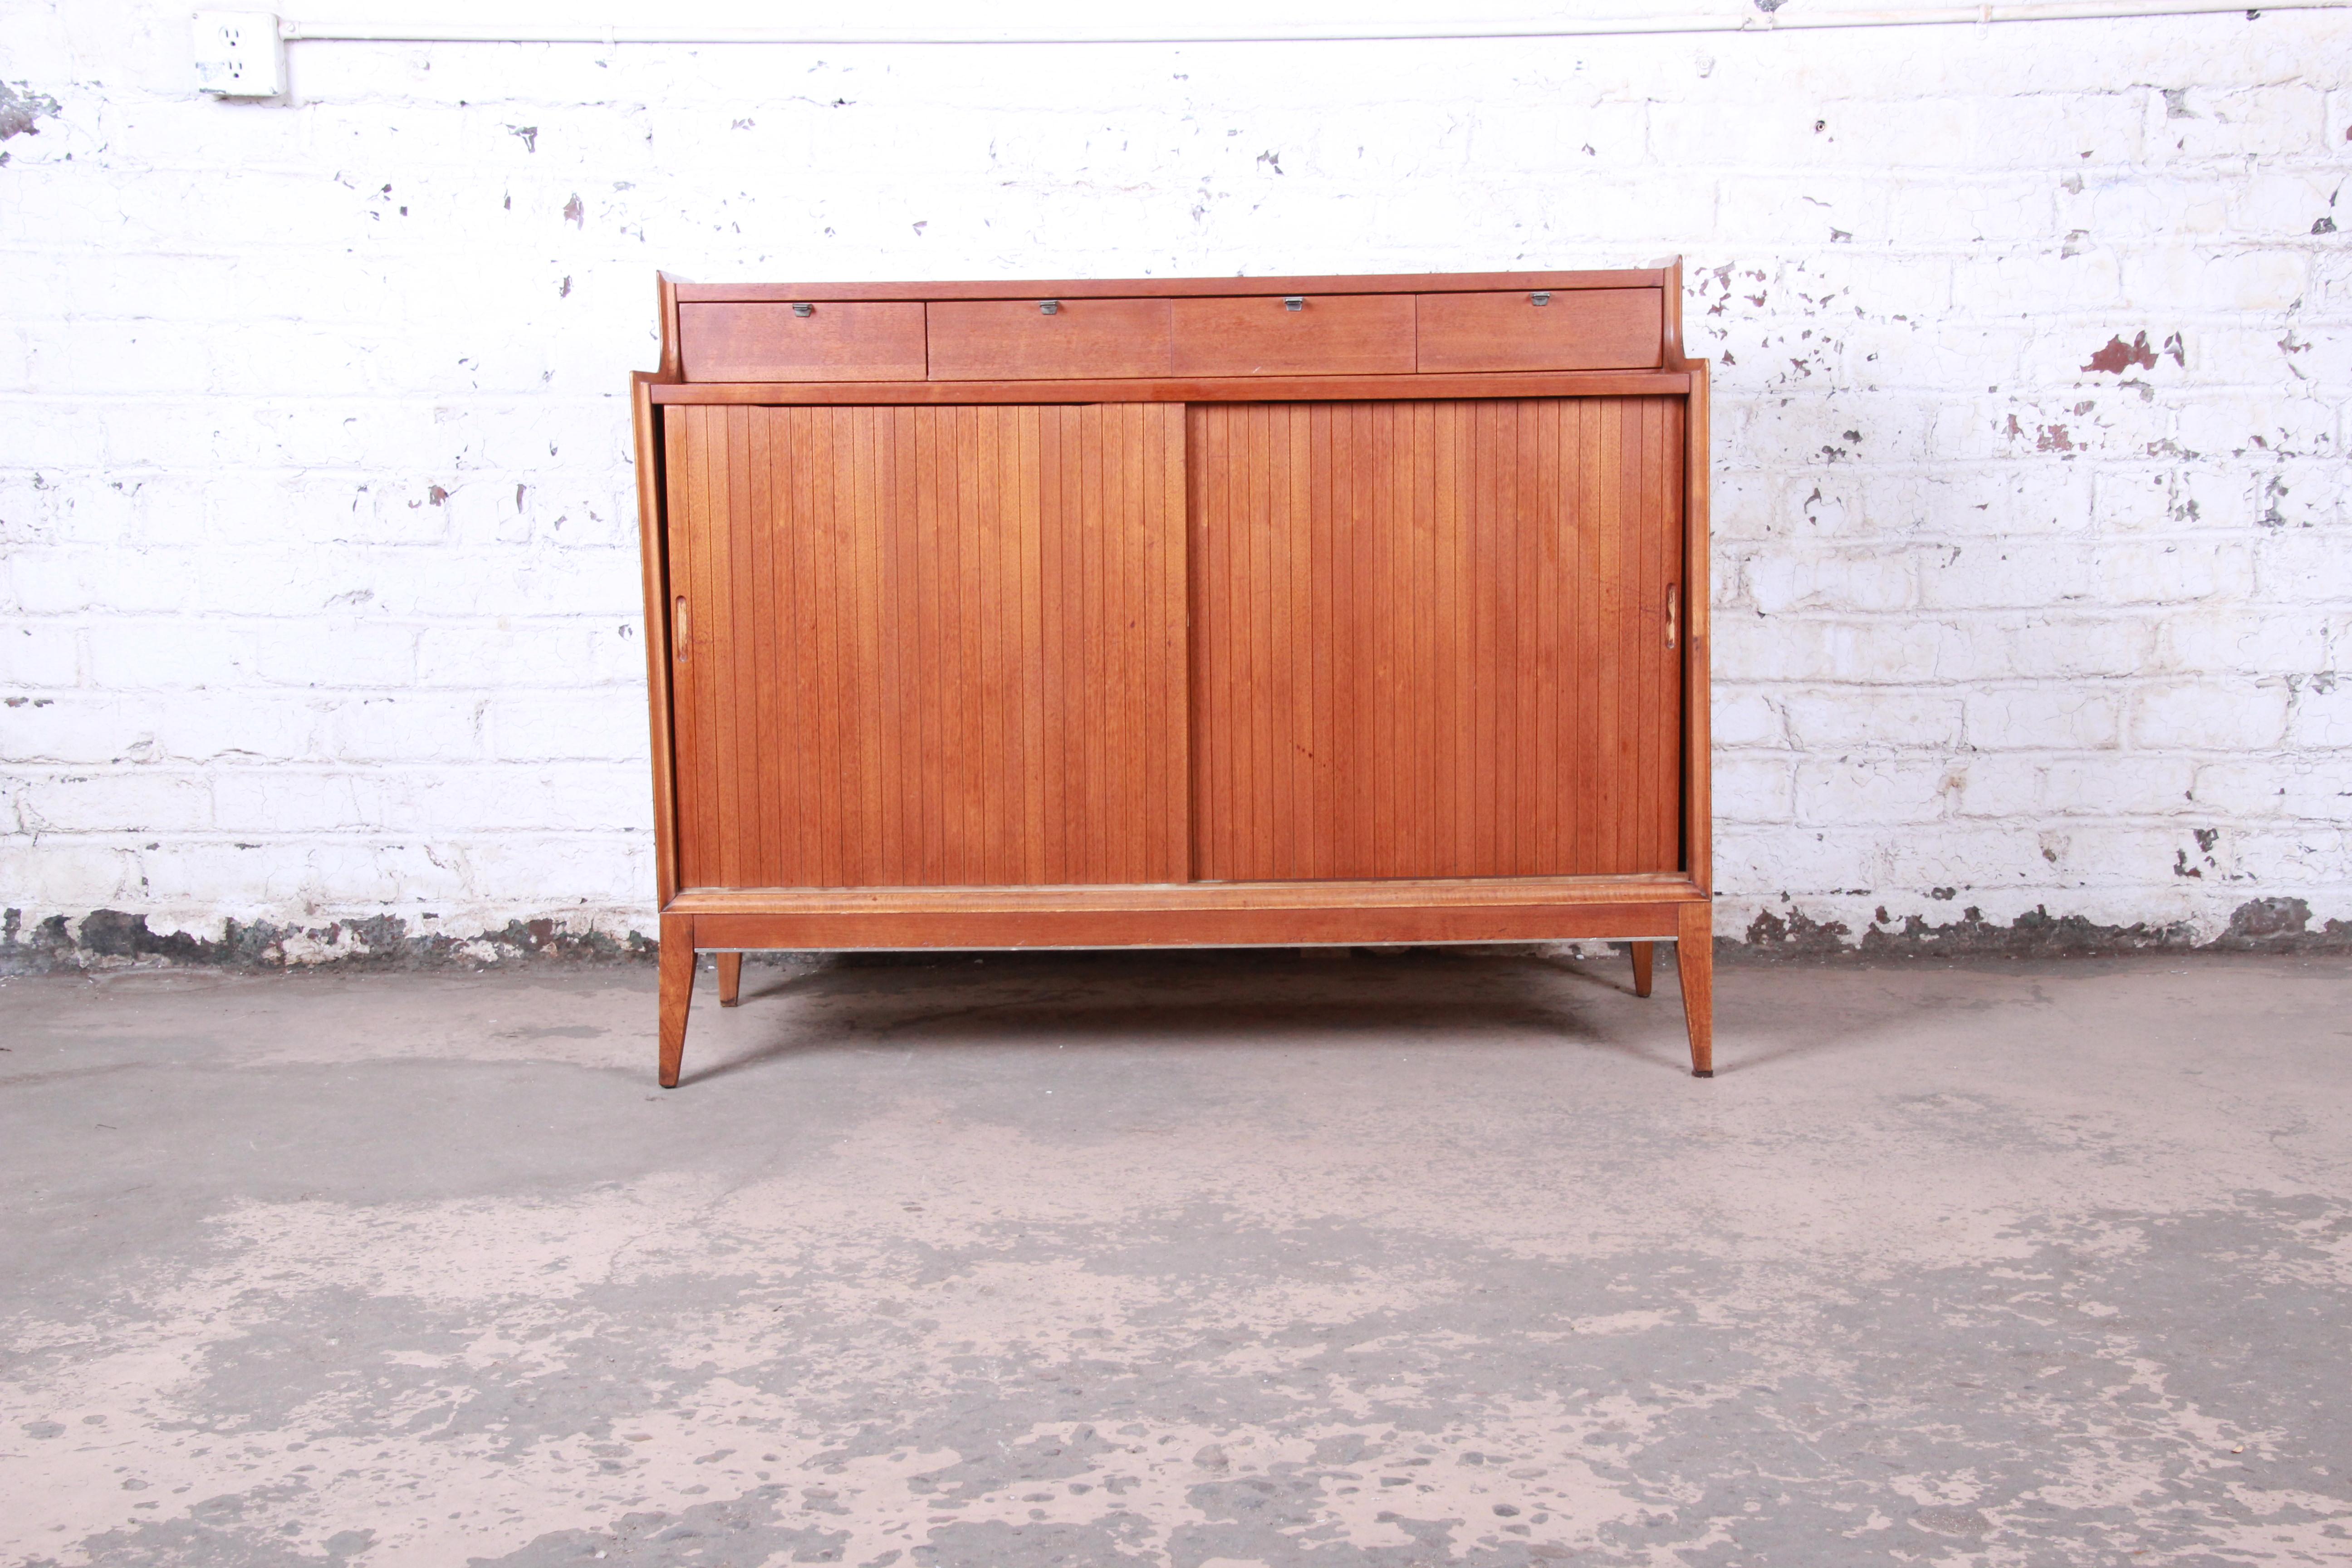 A gorgeous Mid-Century Modern sideboard credenza or bar cabinet designed by Arthur Umanoff for Cavalier Furniture. The credenza features stunning walnut wood grain and sleek Mid-Century Modern design. It offers ample storage, with four small drawers